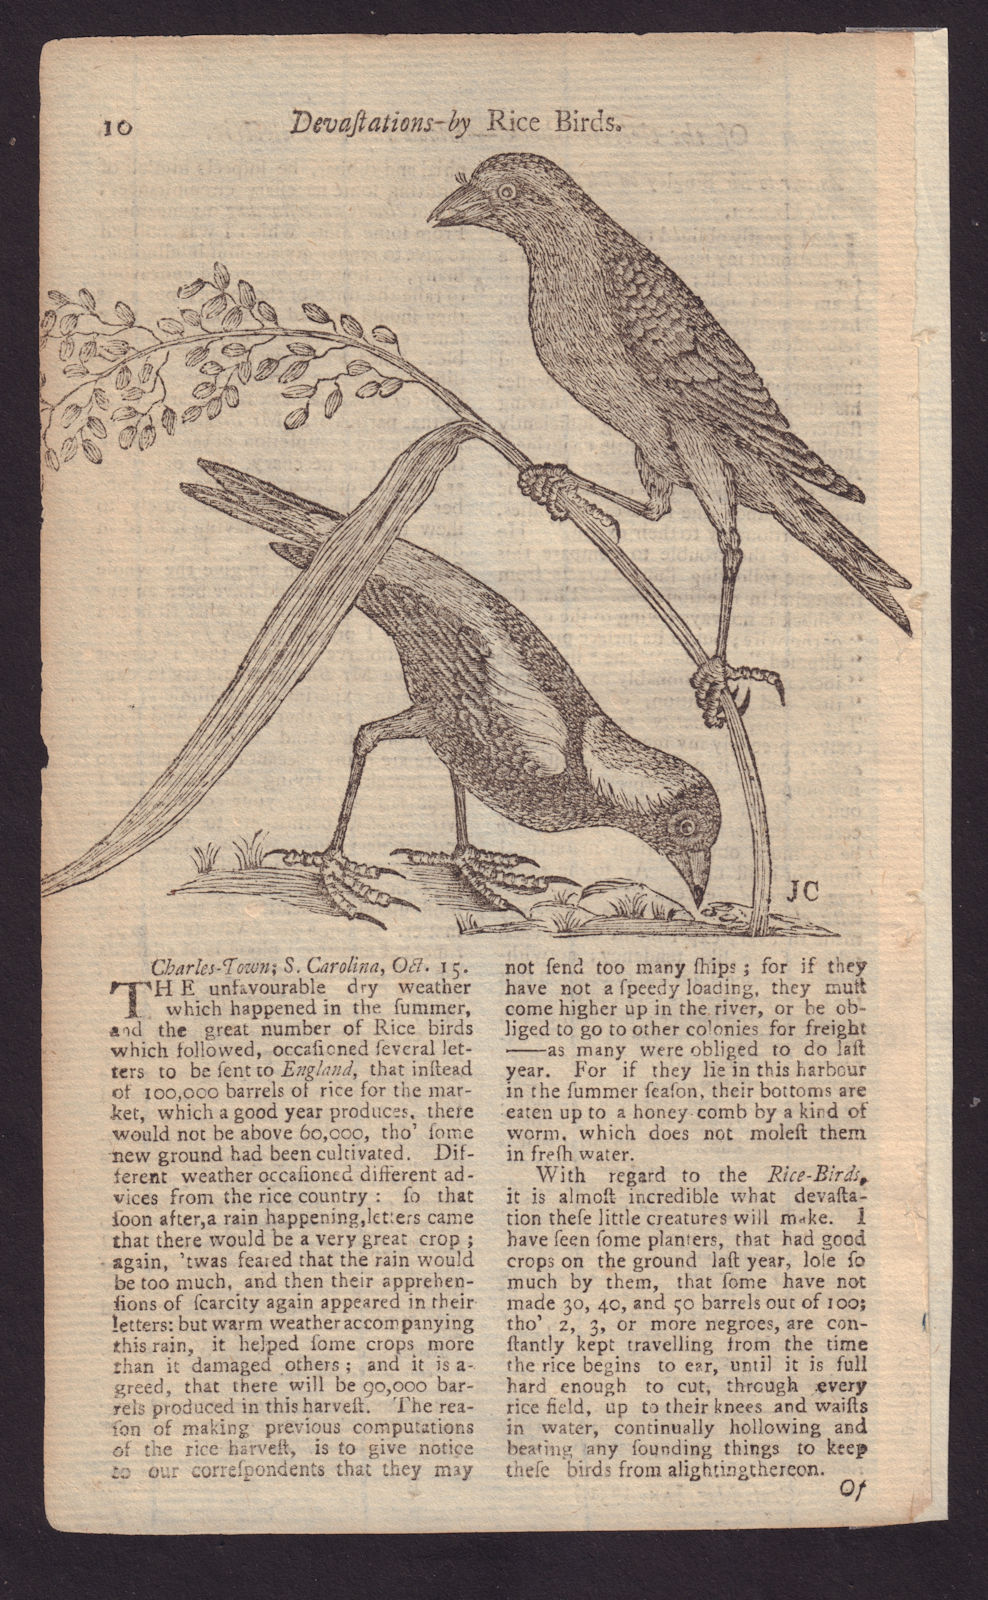 Associate Product Devastations by Rice Birds of the Carolinas. GENTS MAG 1751 old antique print